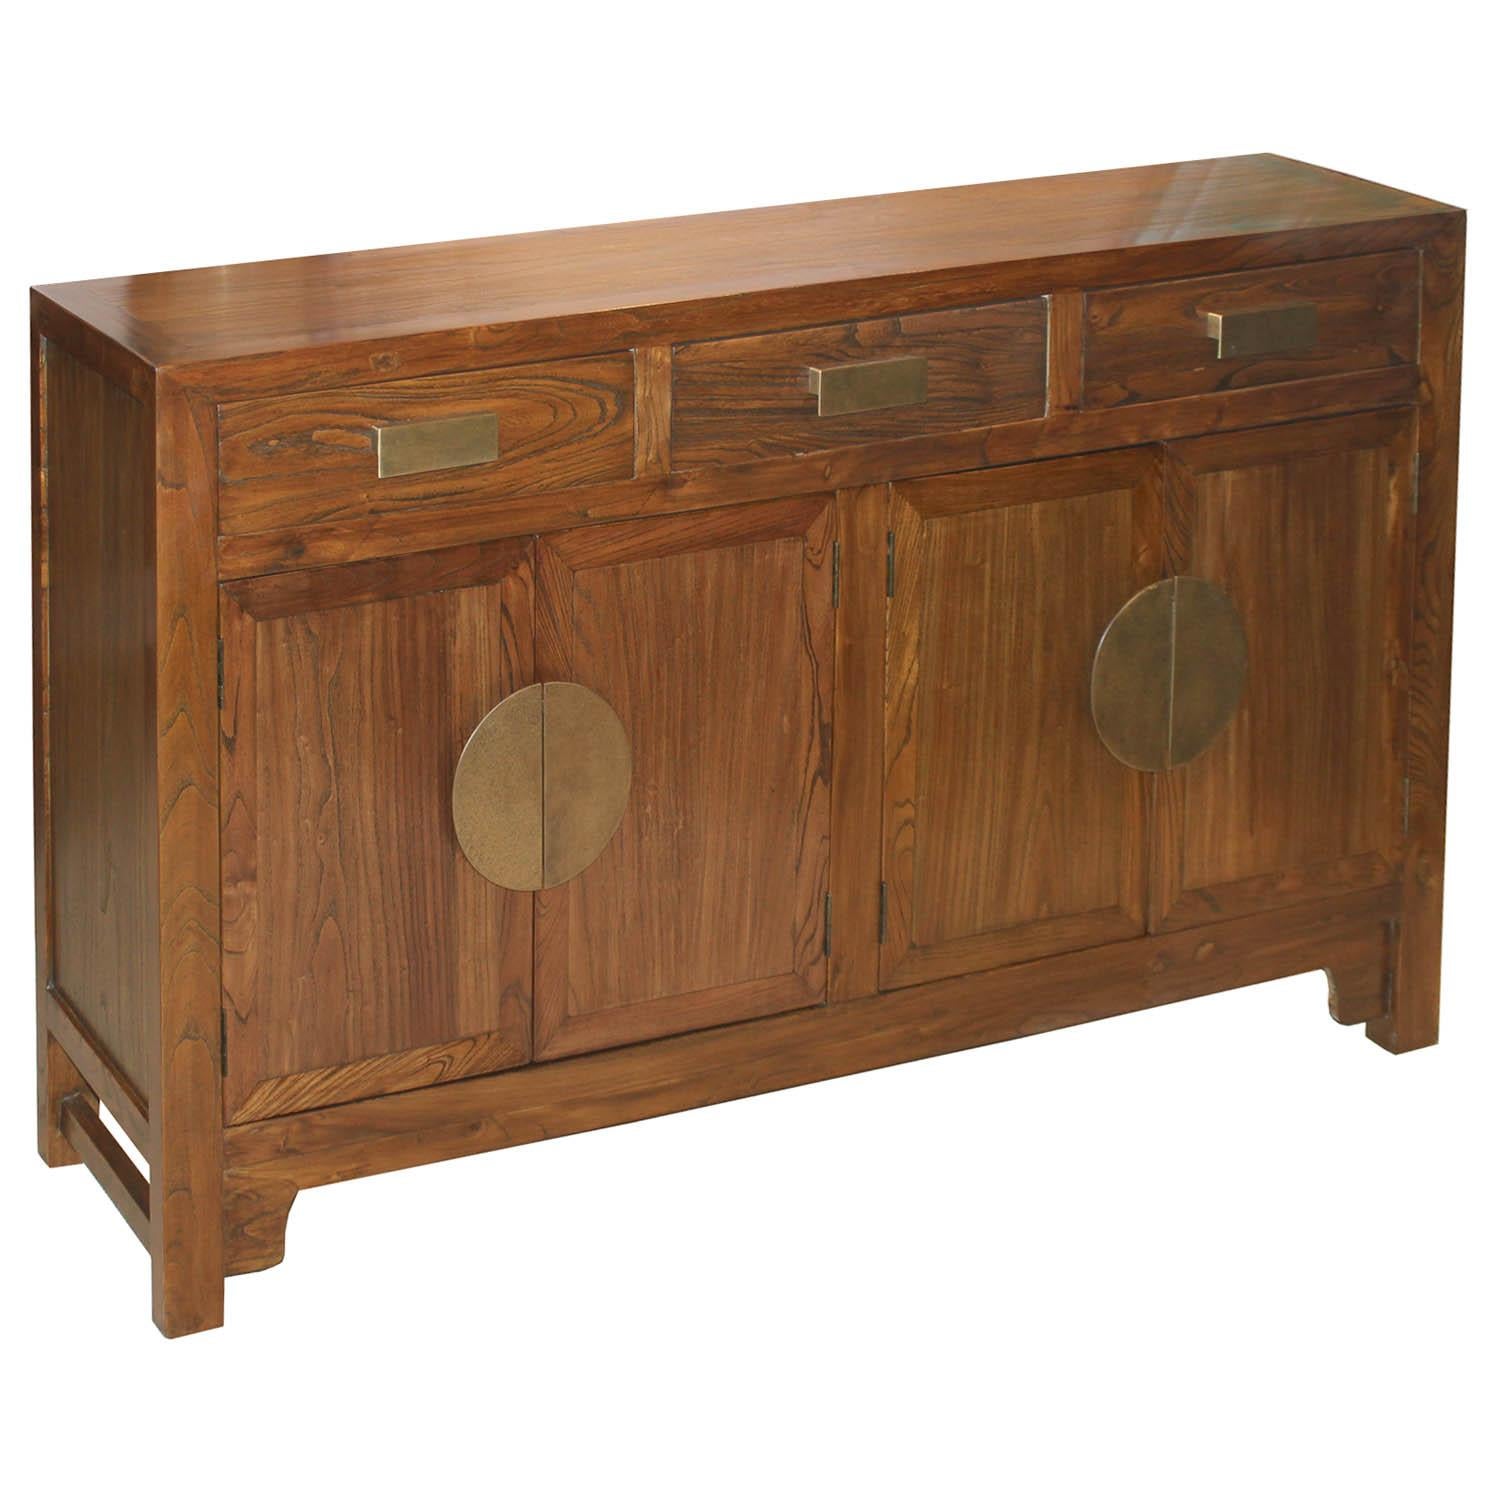 Contemporary sideboard with beautiful elm wood grain, and hand-hammered brass moon shaped hardware can be used behind a sofa or as a server in the dining room.